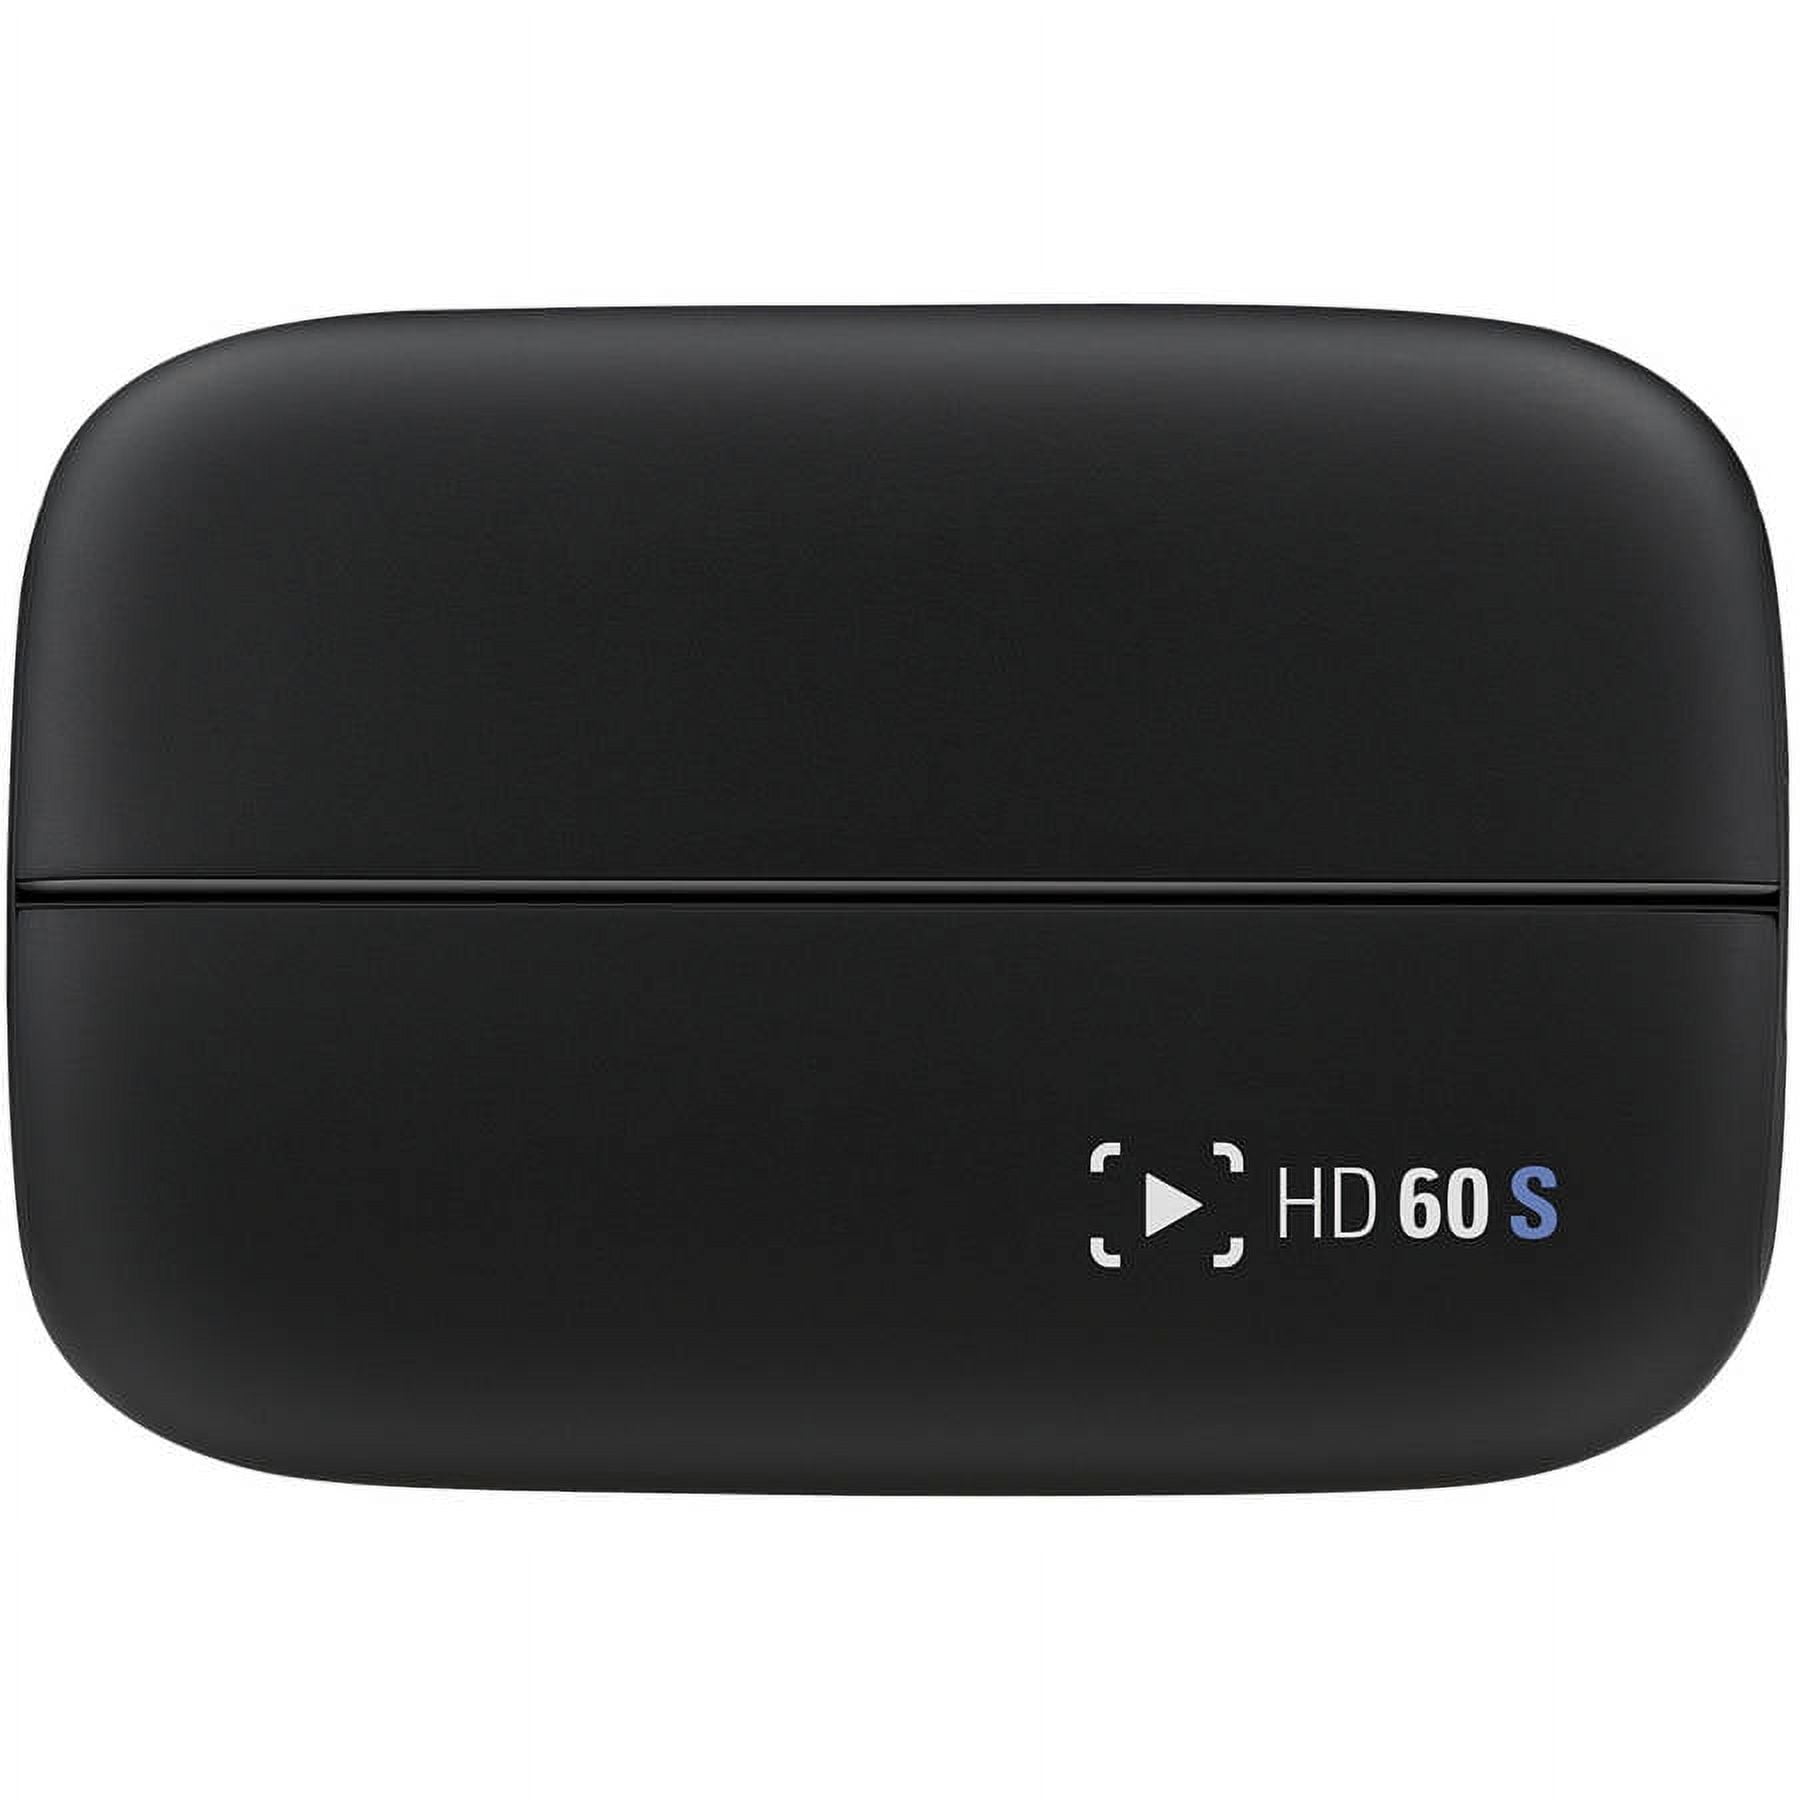 Buy China Wholesale Best Quality Elgato Game Capture Card Hd60 S - Stream  And Record In 1080p60 & Video Capture $185